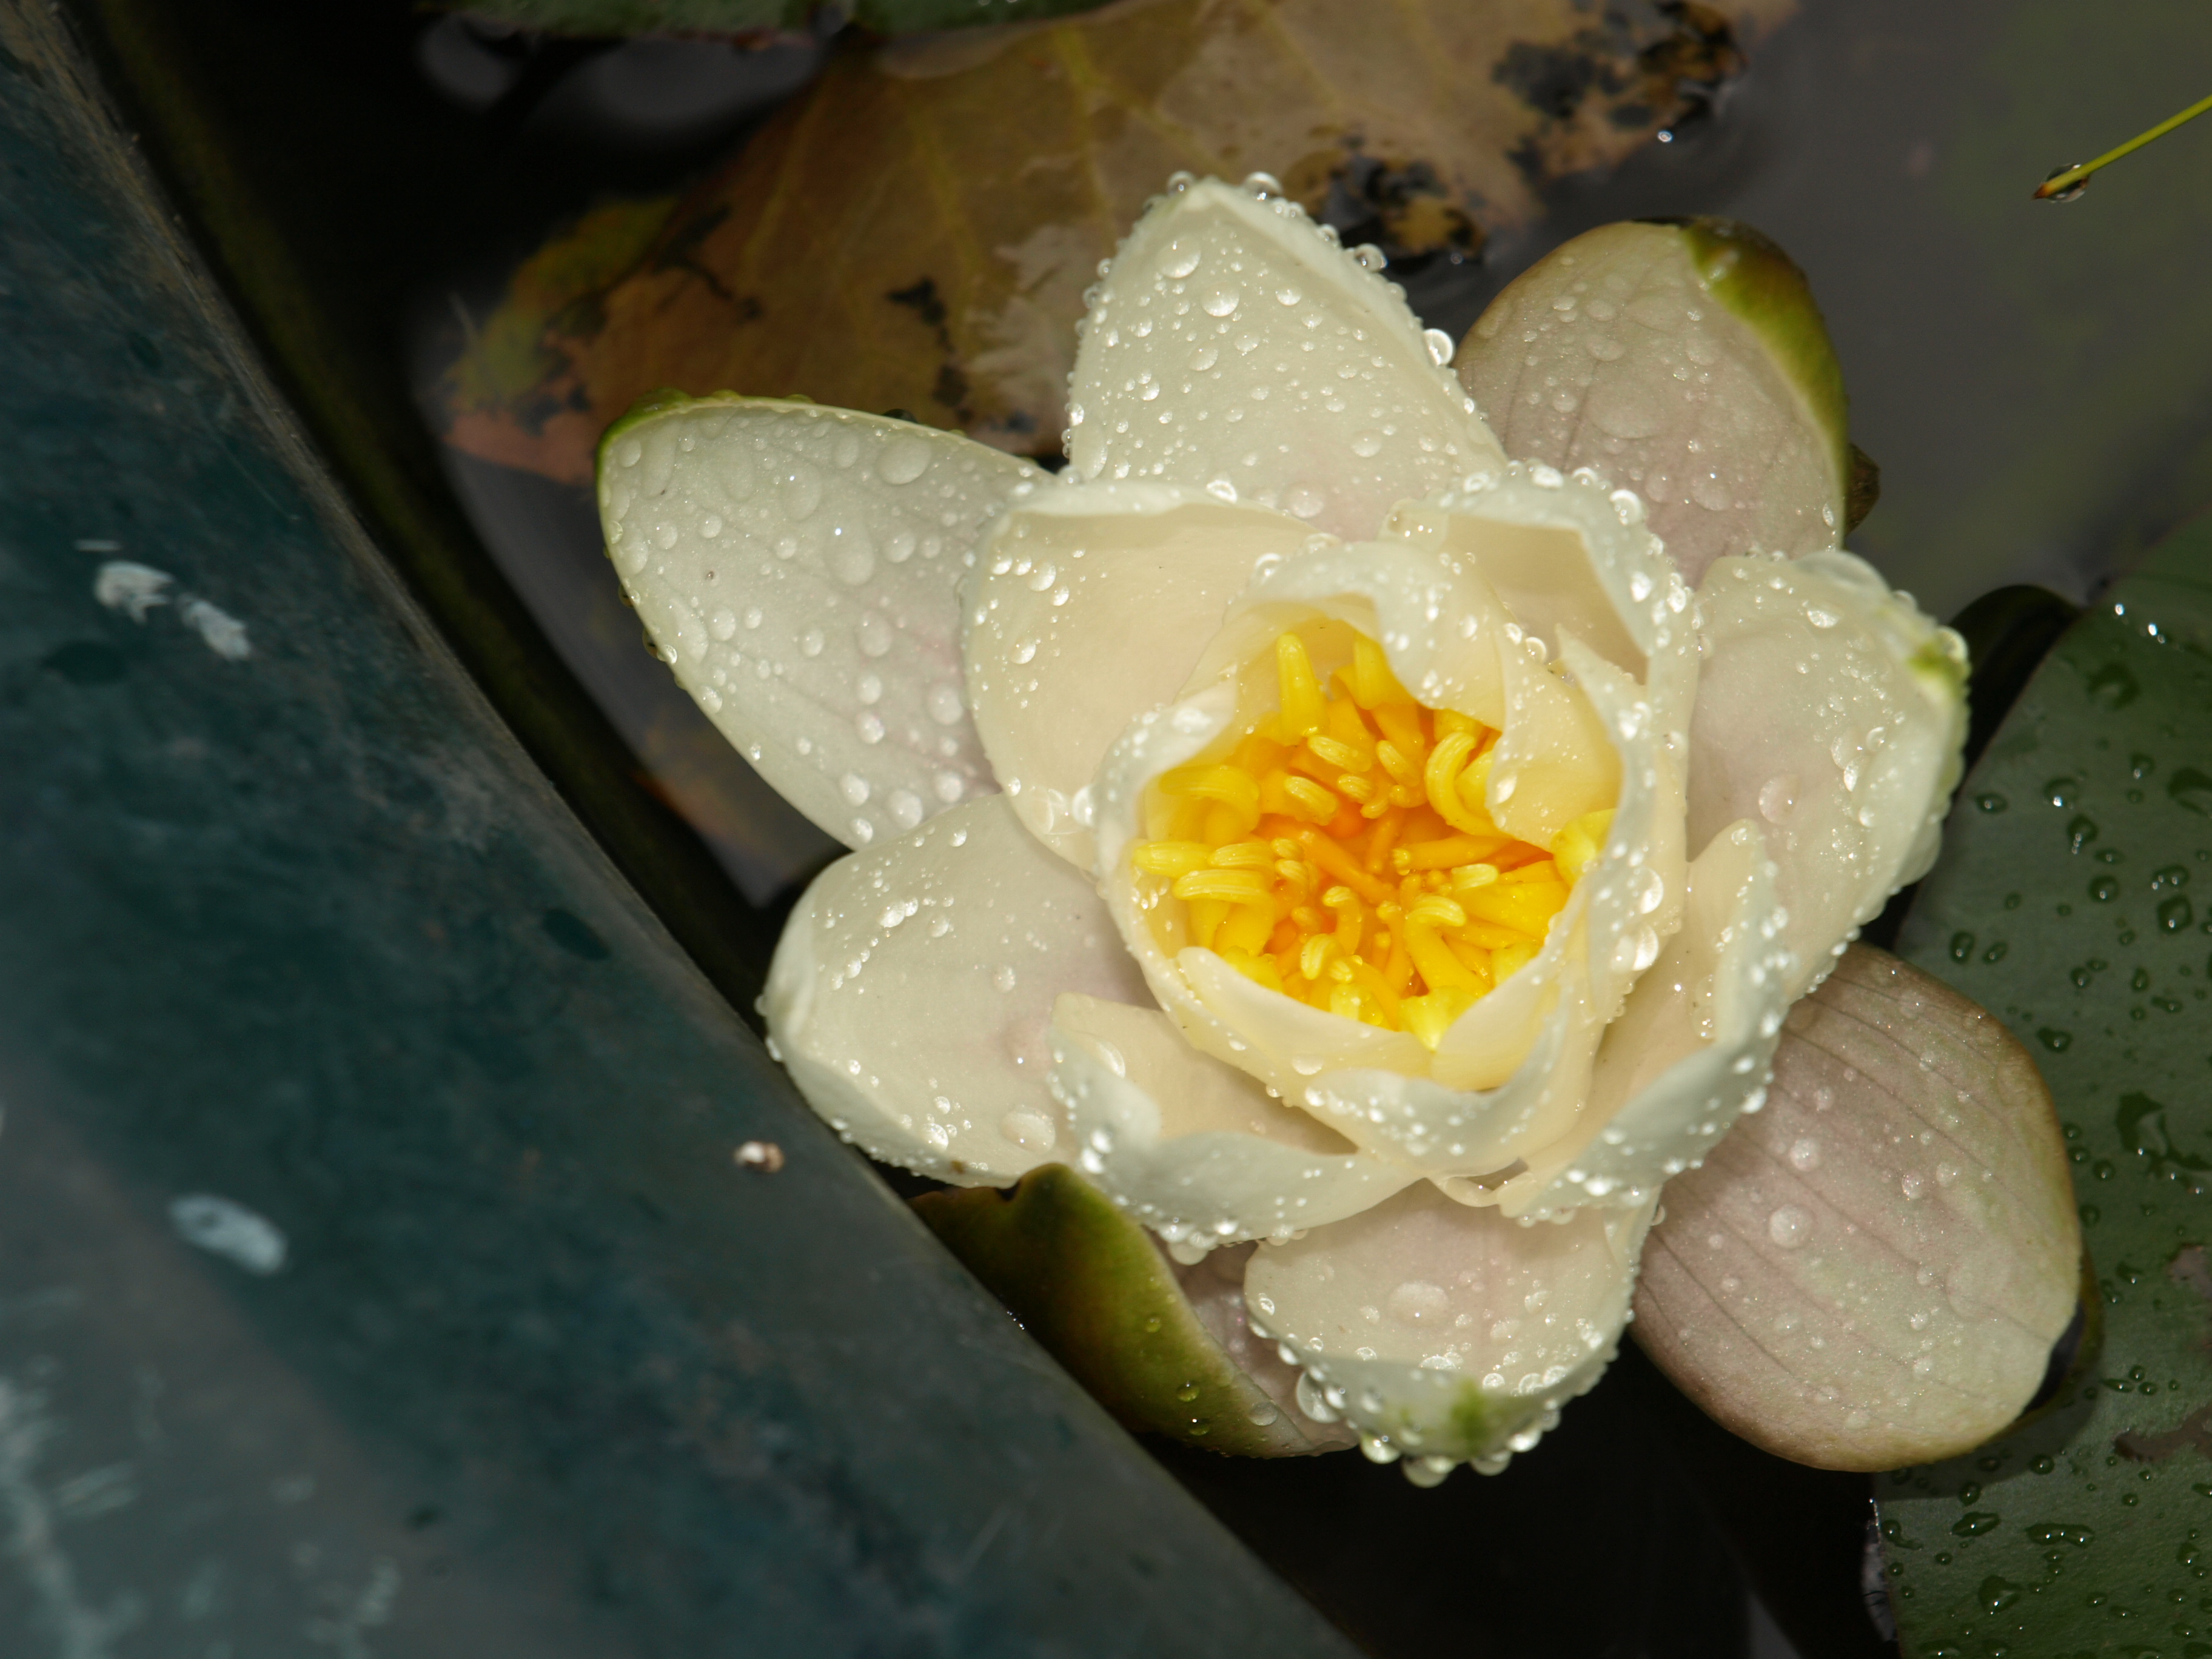 Water Lily in Pond